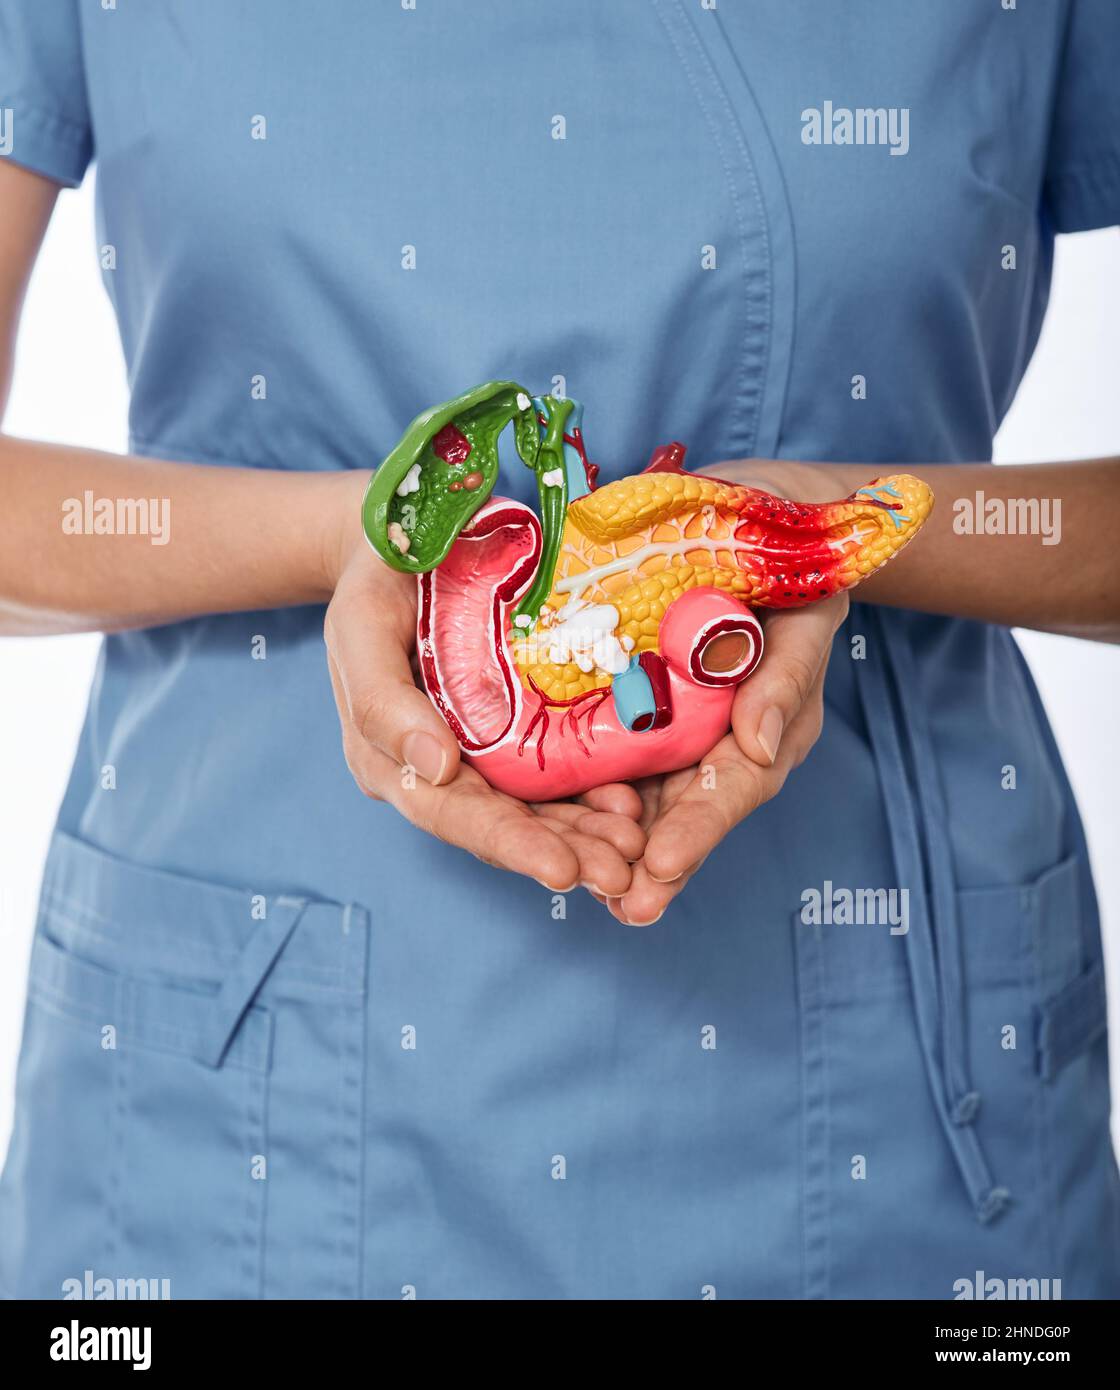 Diagnosis and treatment of pancreatic disease. doctor showing anatomical model of pancreas demonstrating pancreas health concept, close-up Stock Photo